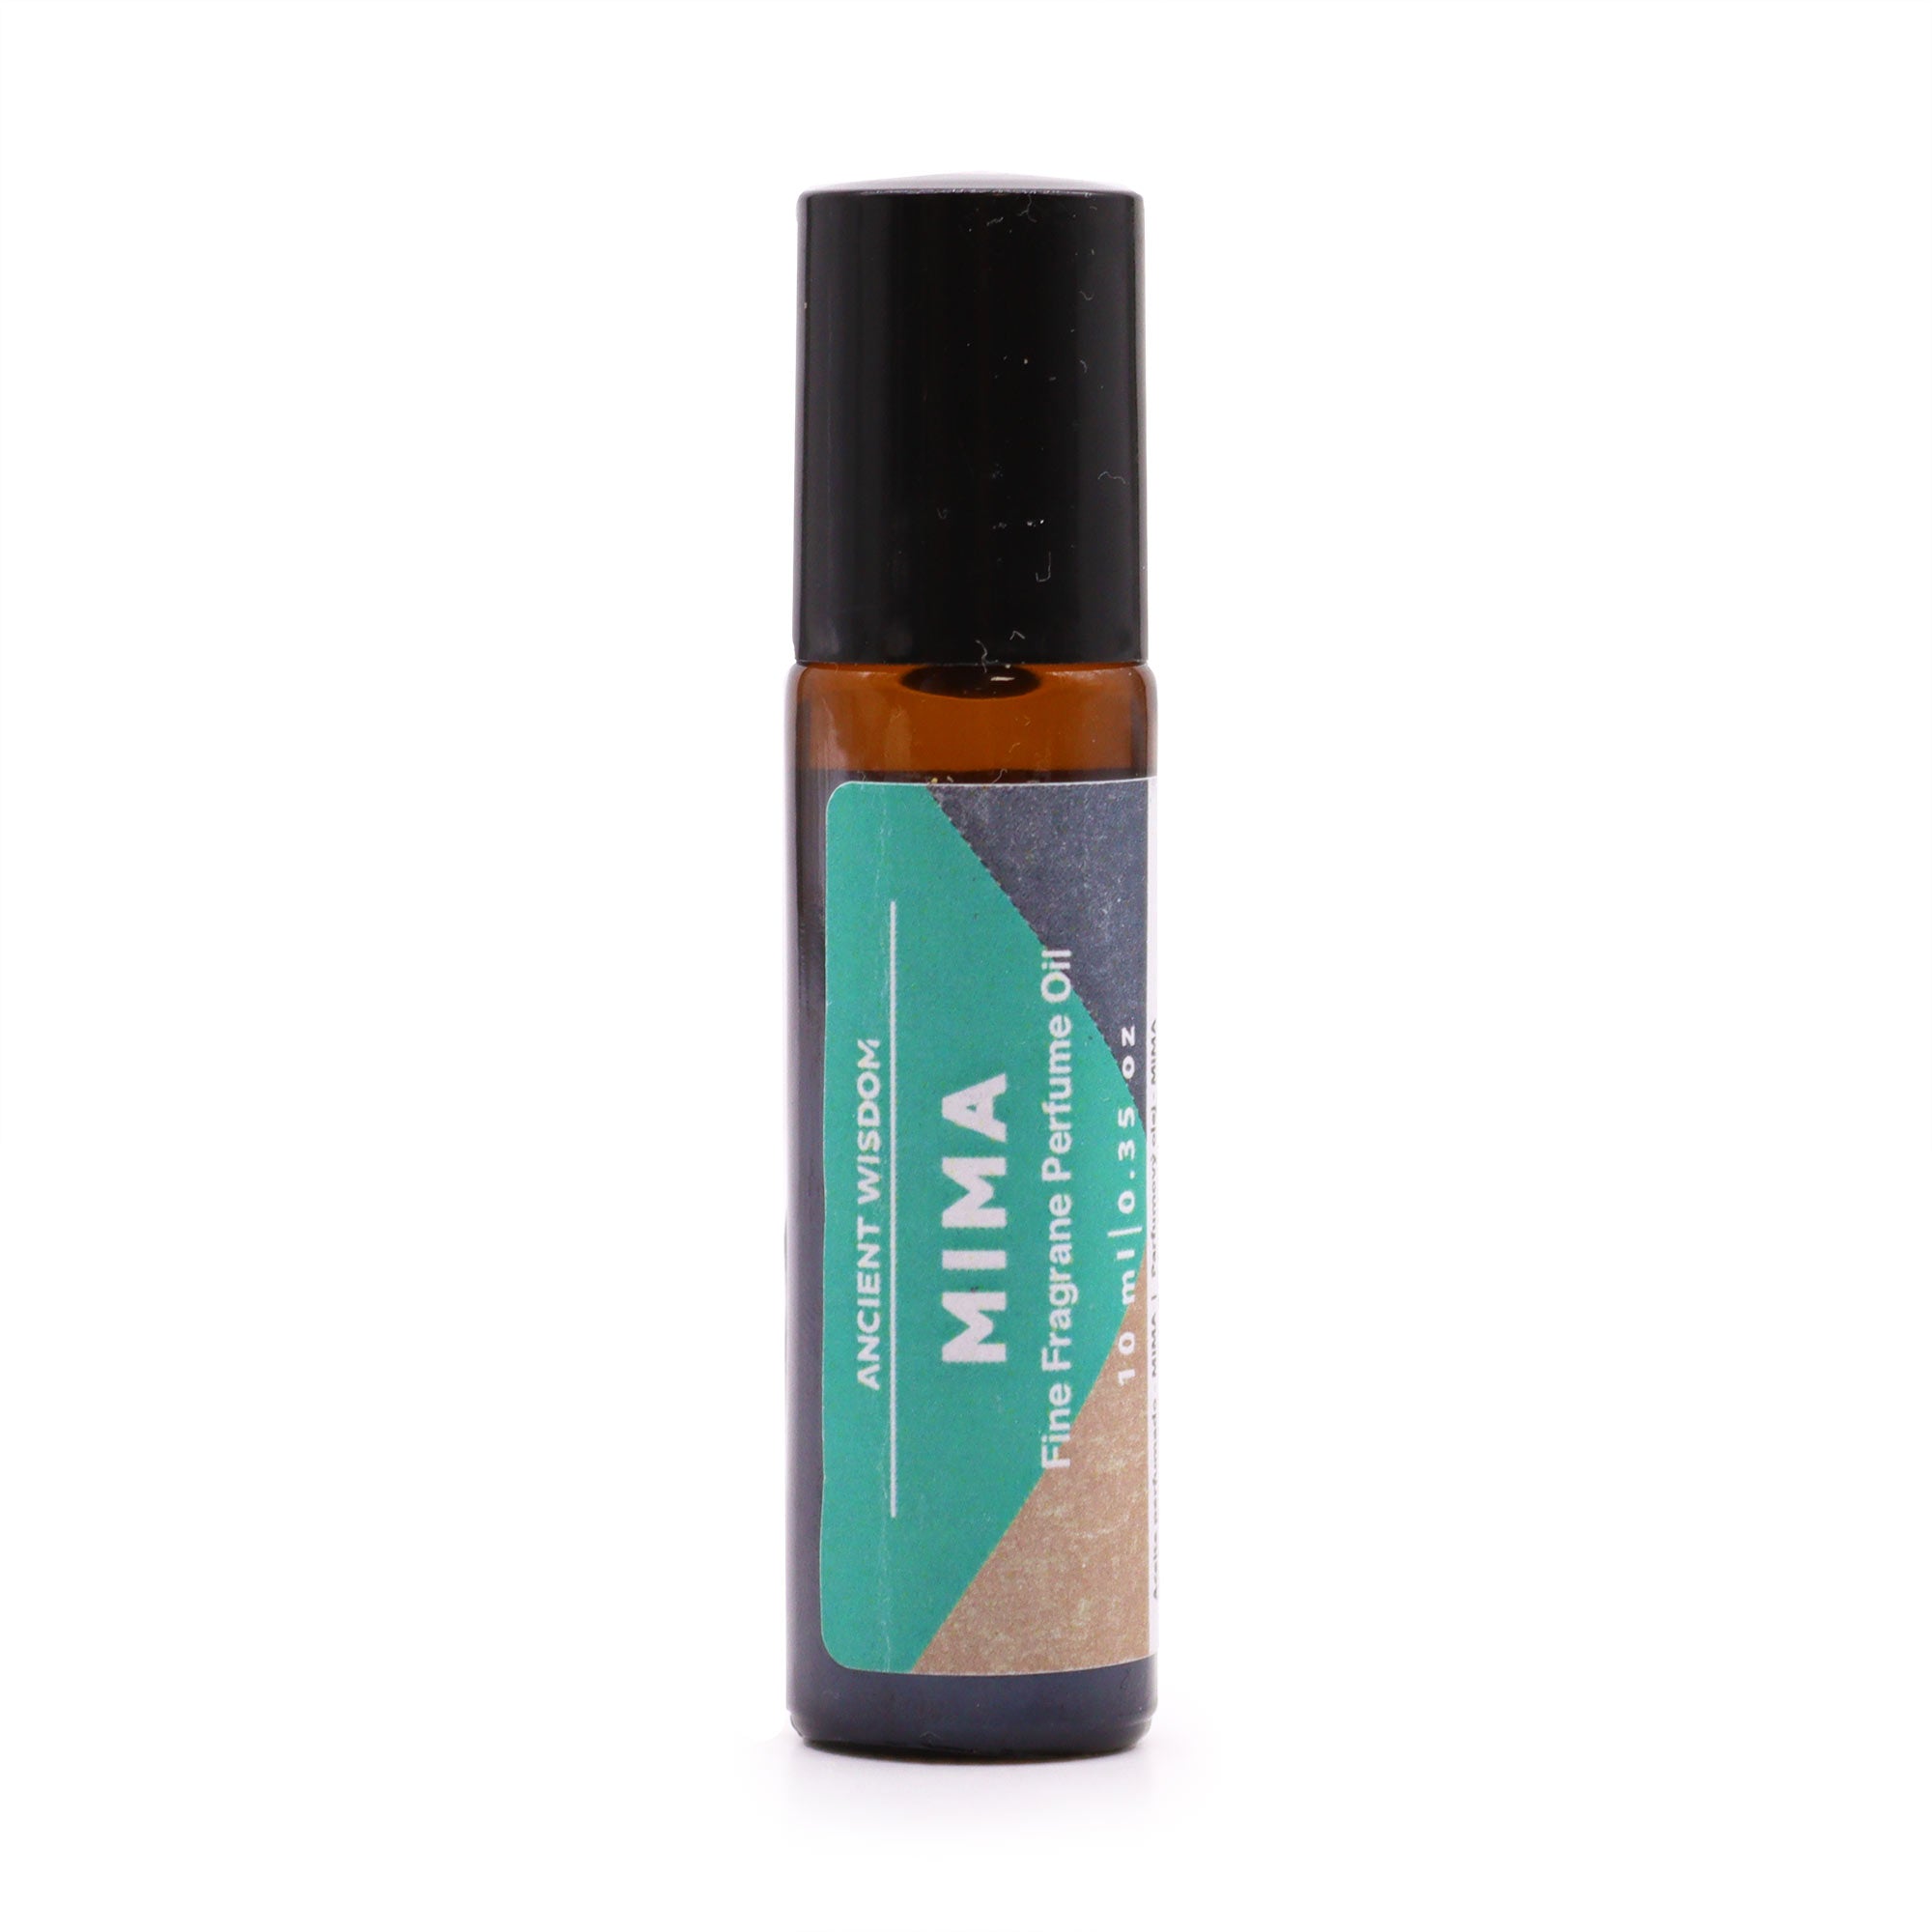 Mima Fine Fragrance Perfume Oil 10ml - Inspired by &